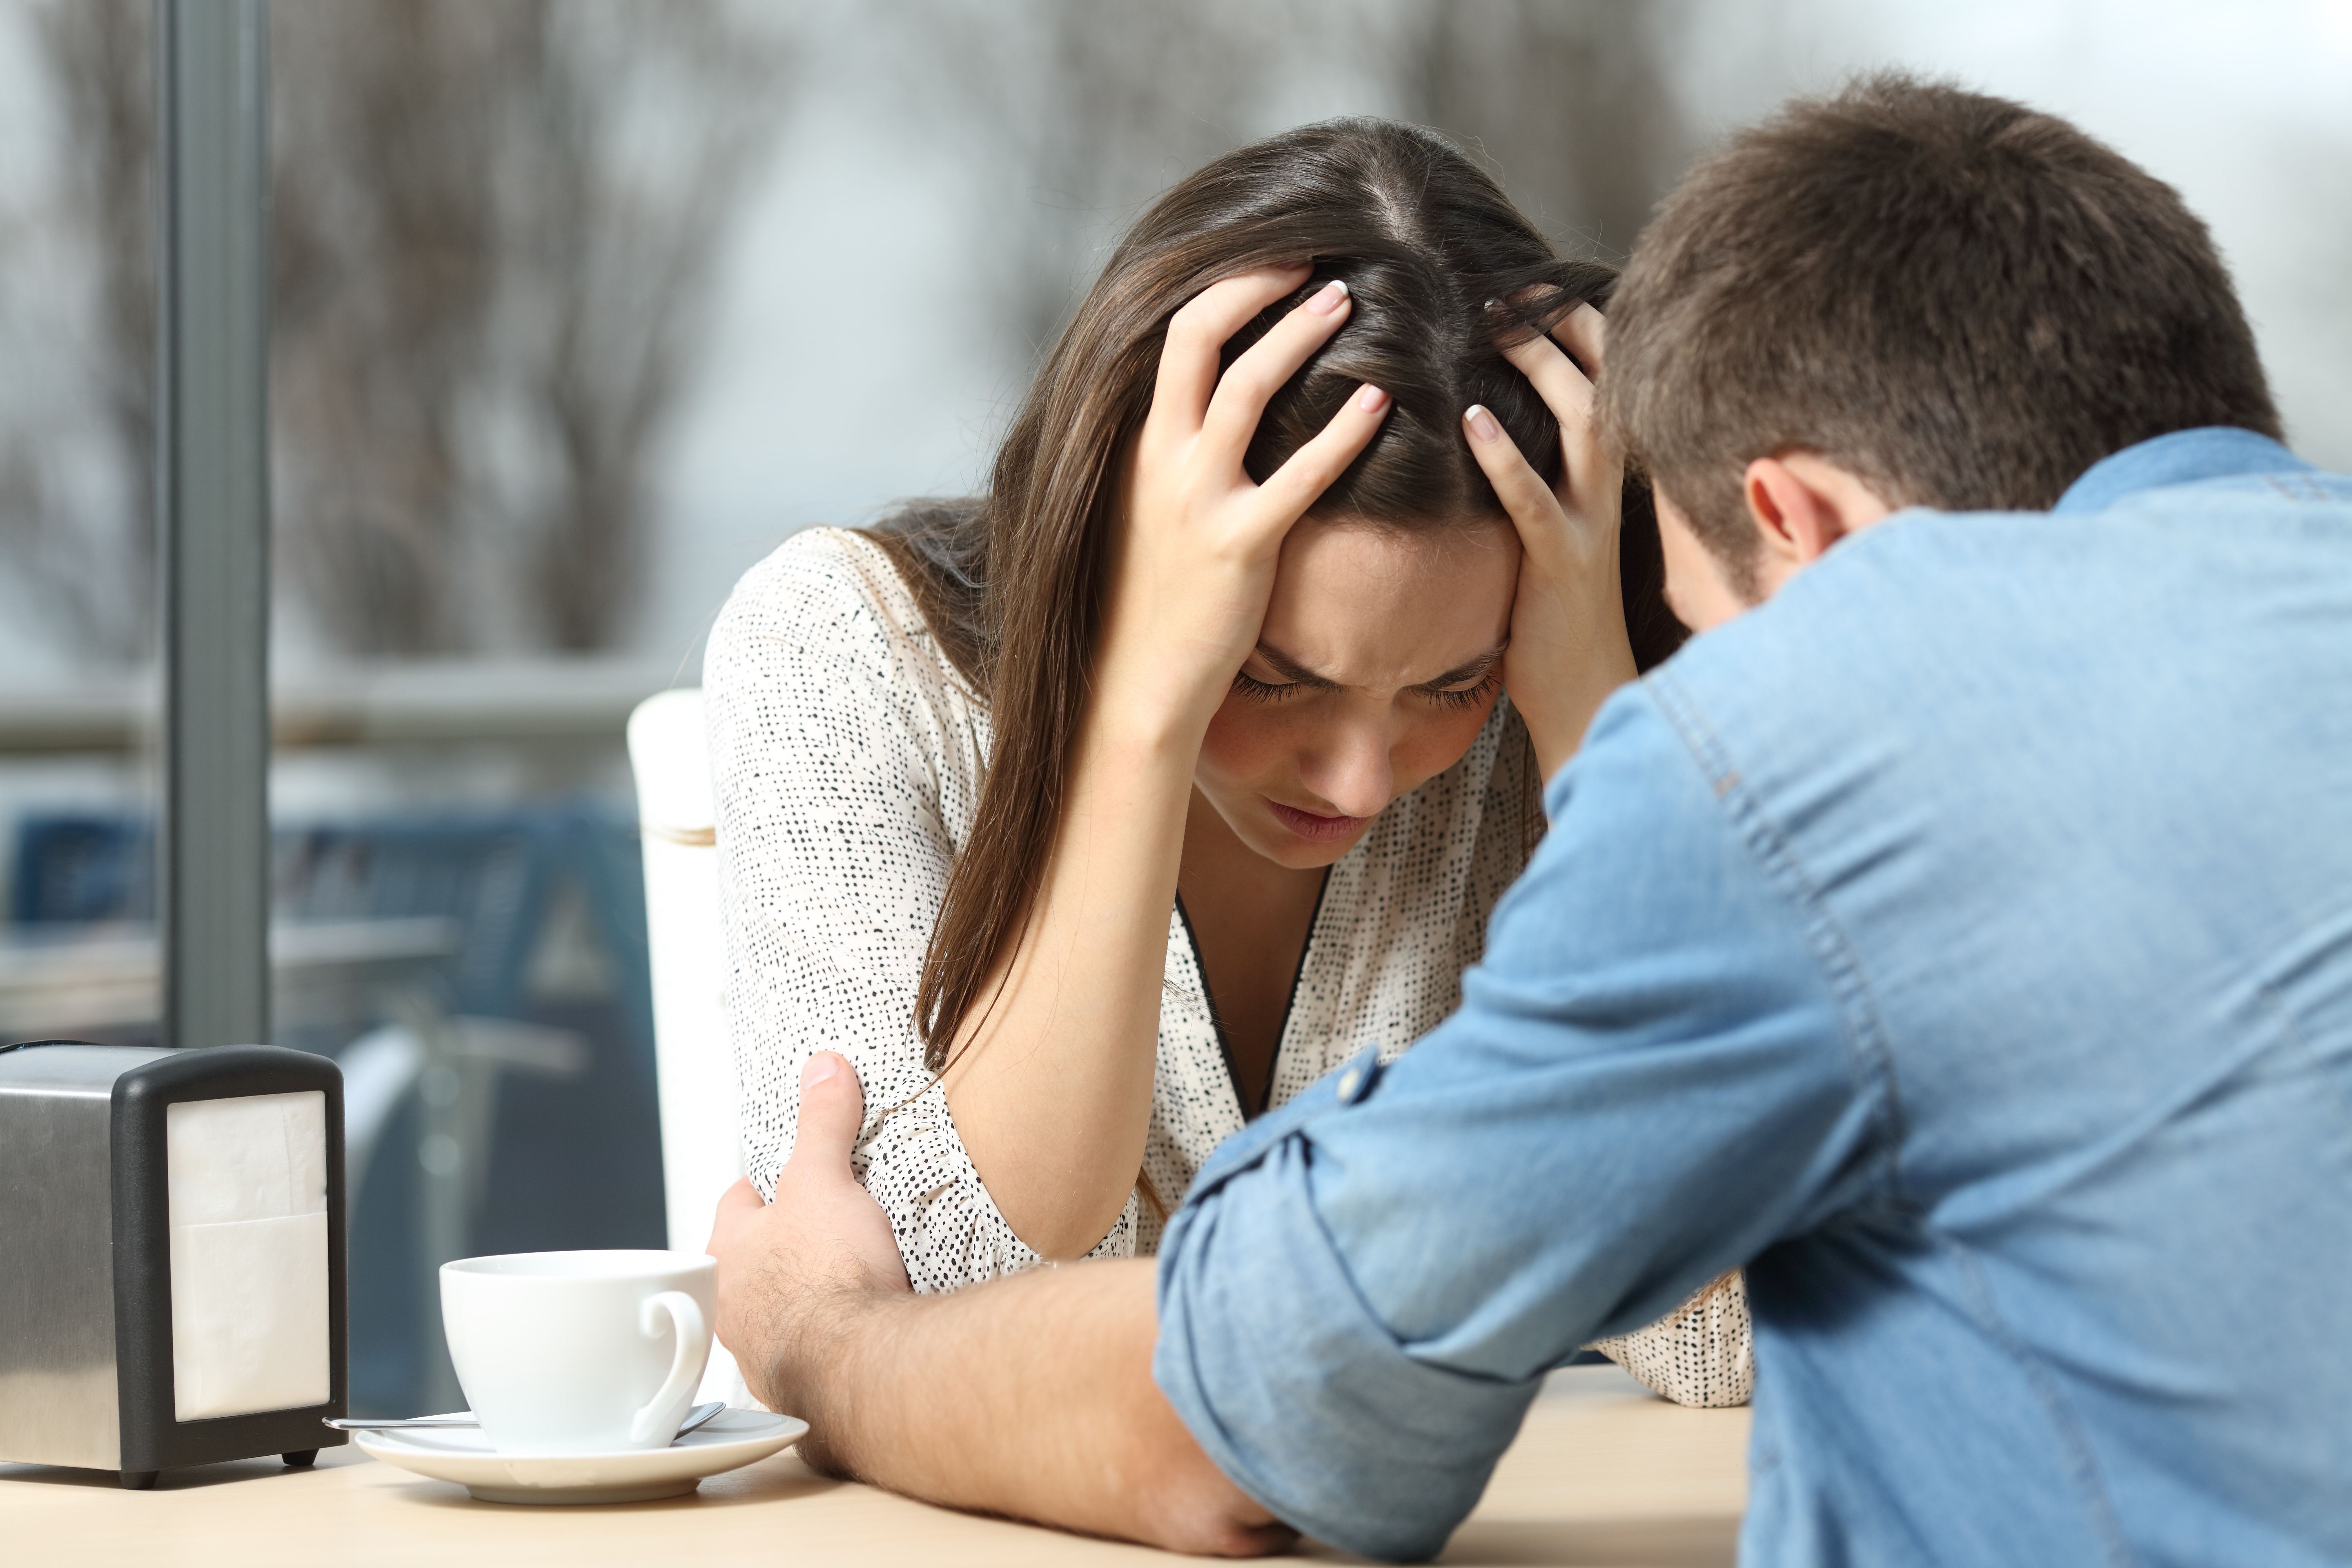 A couple talks about a problem they have together. | Photo: Shutterstock